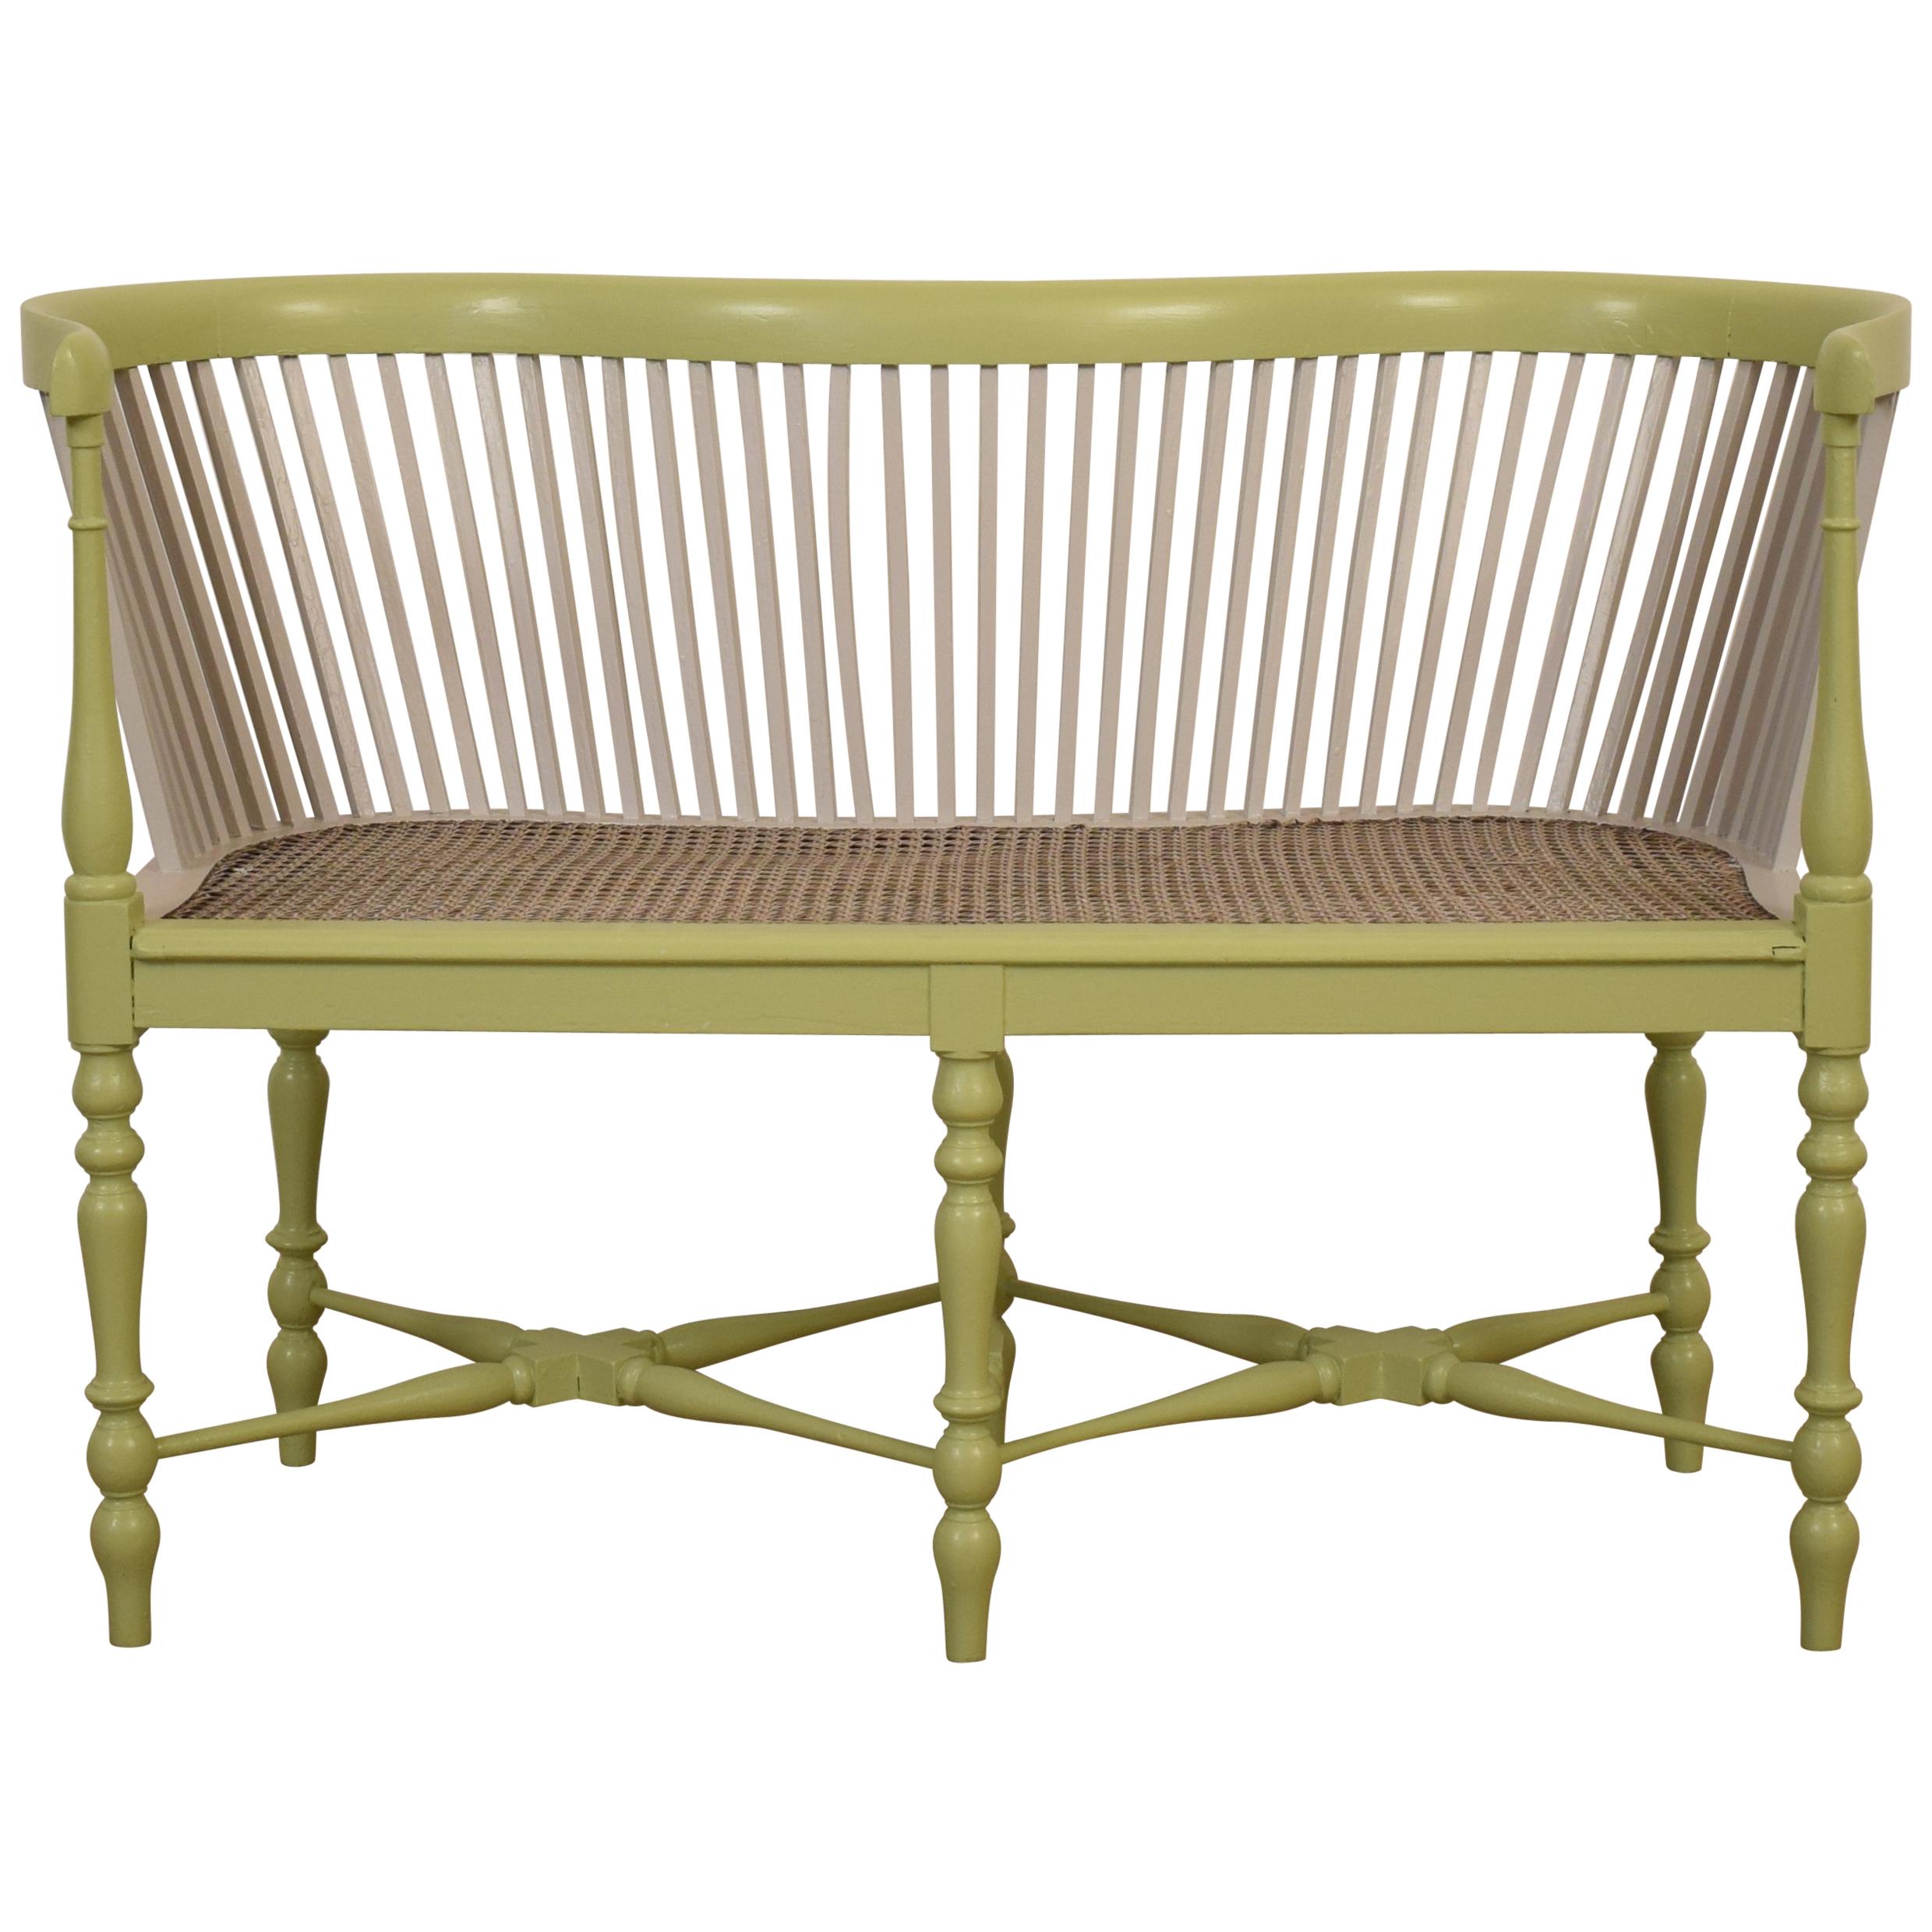 Late 19th Century French Louis XVI Painted and Caned Small Bench